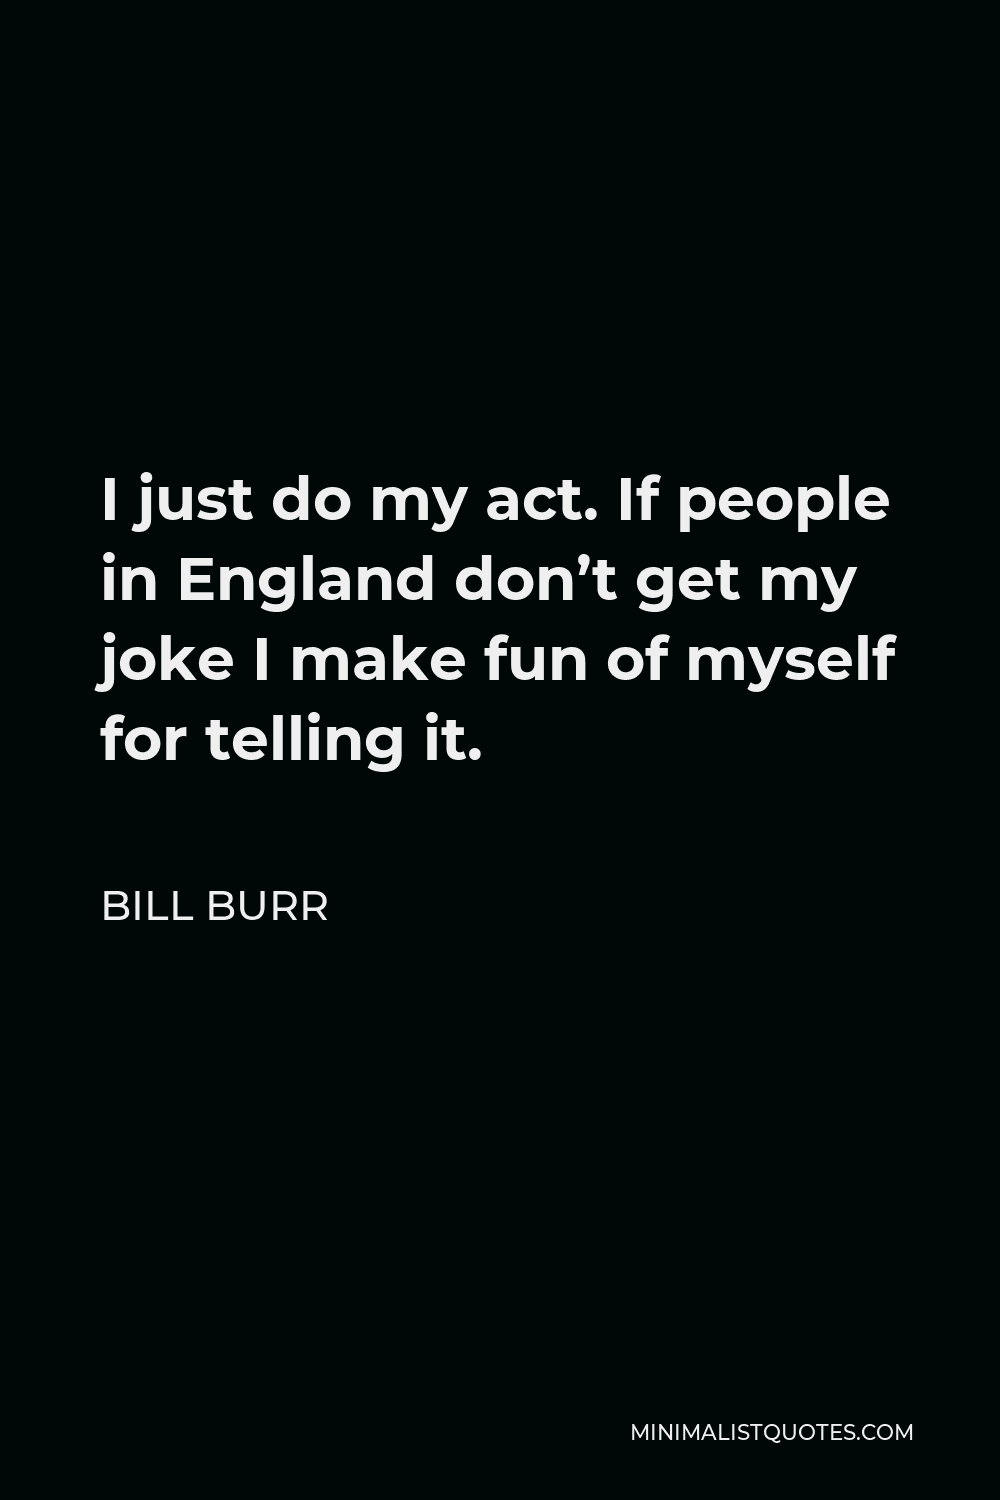 Bill Burr Quote - I just do my act. If people in England don’t get my joke I make fun of myself for telling it.